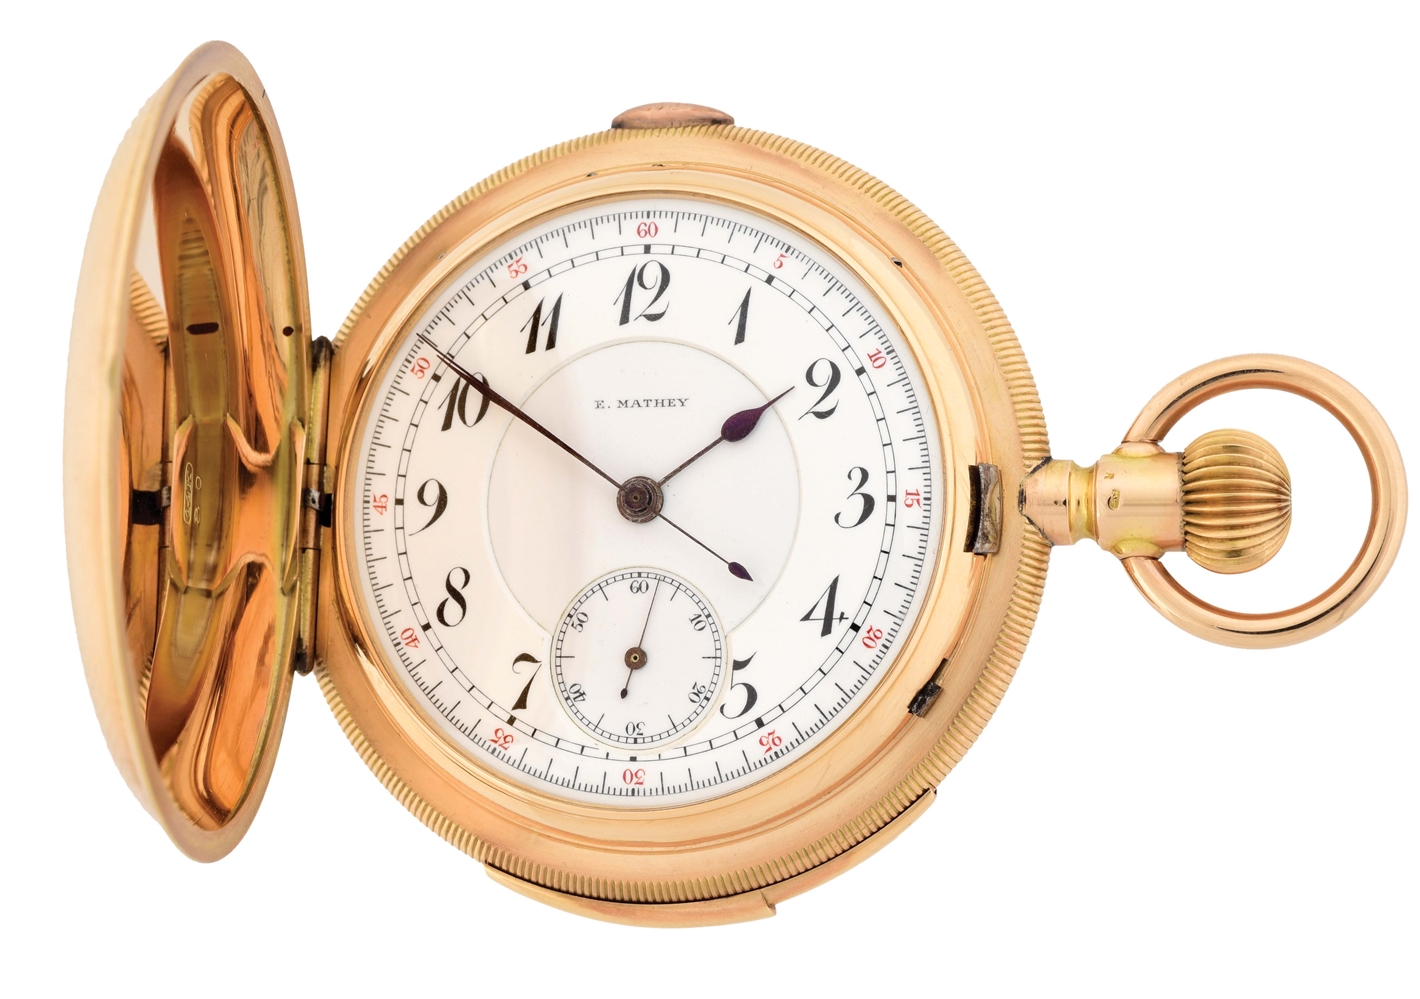 14K GOLD E. MATHEY SWISS MINUTE REPEATING CHRONOGRAPH H/C POCKET WATCH, CIRCA 1890.